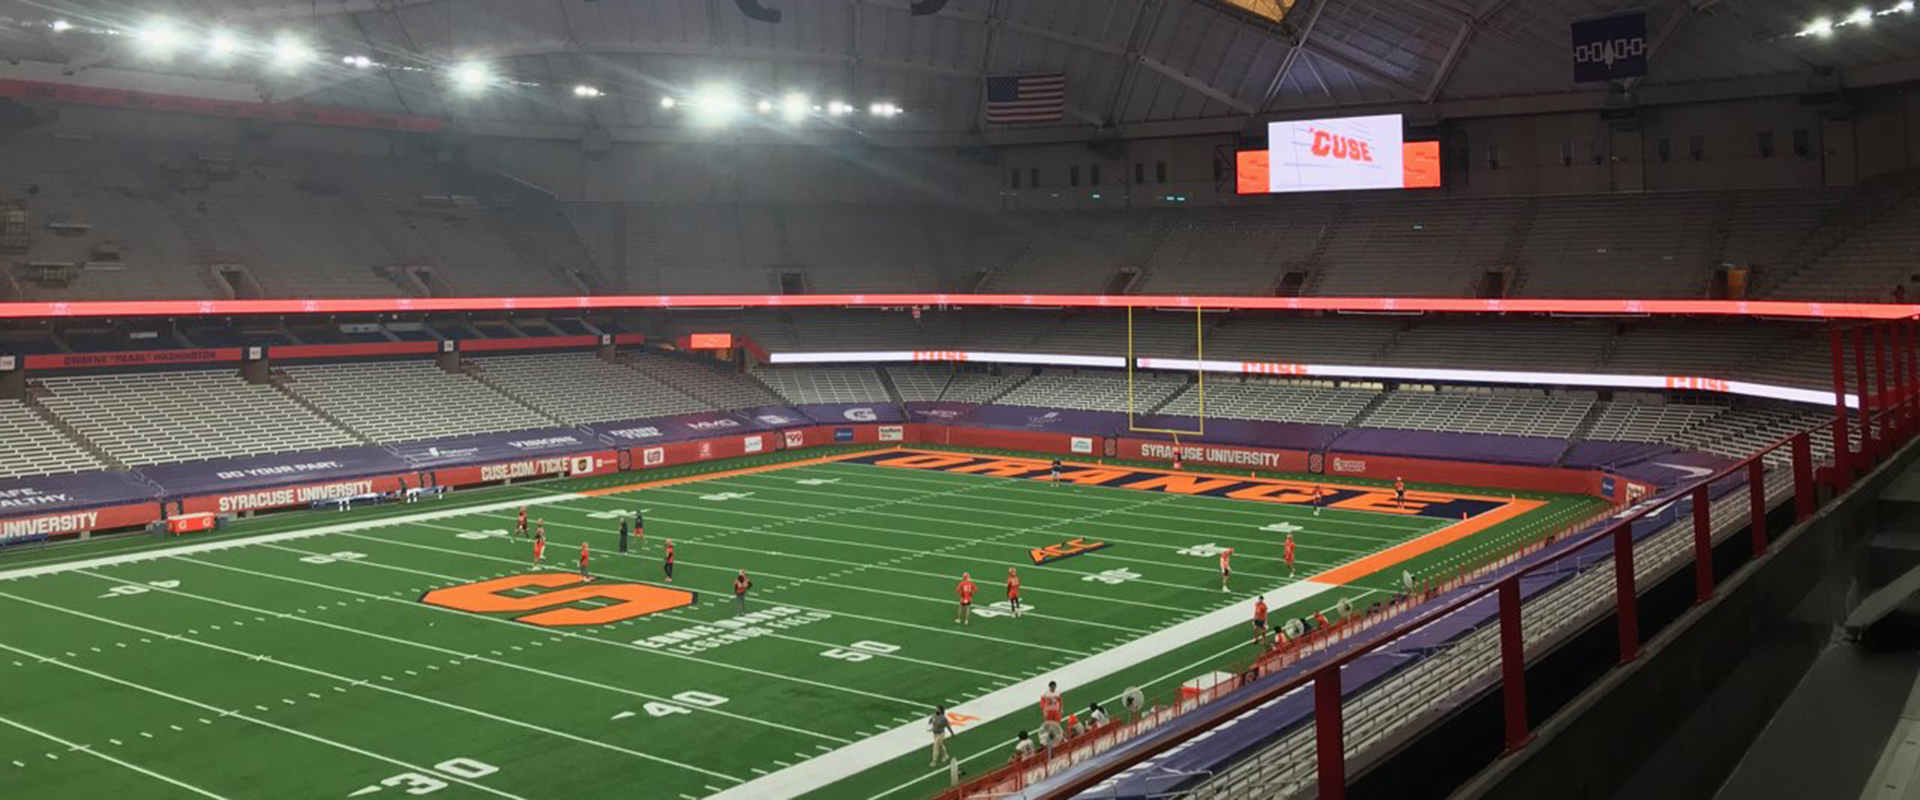 Carrier Dome at Syracuse University in Syracuse, NY